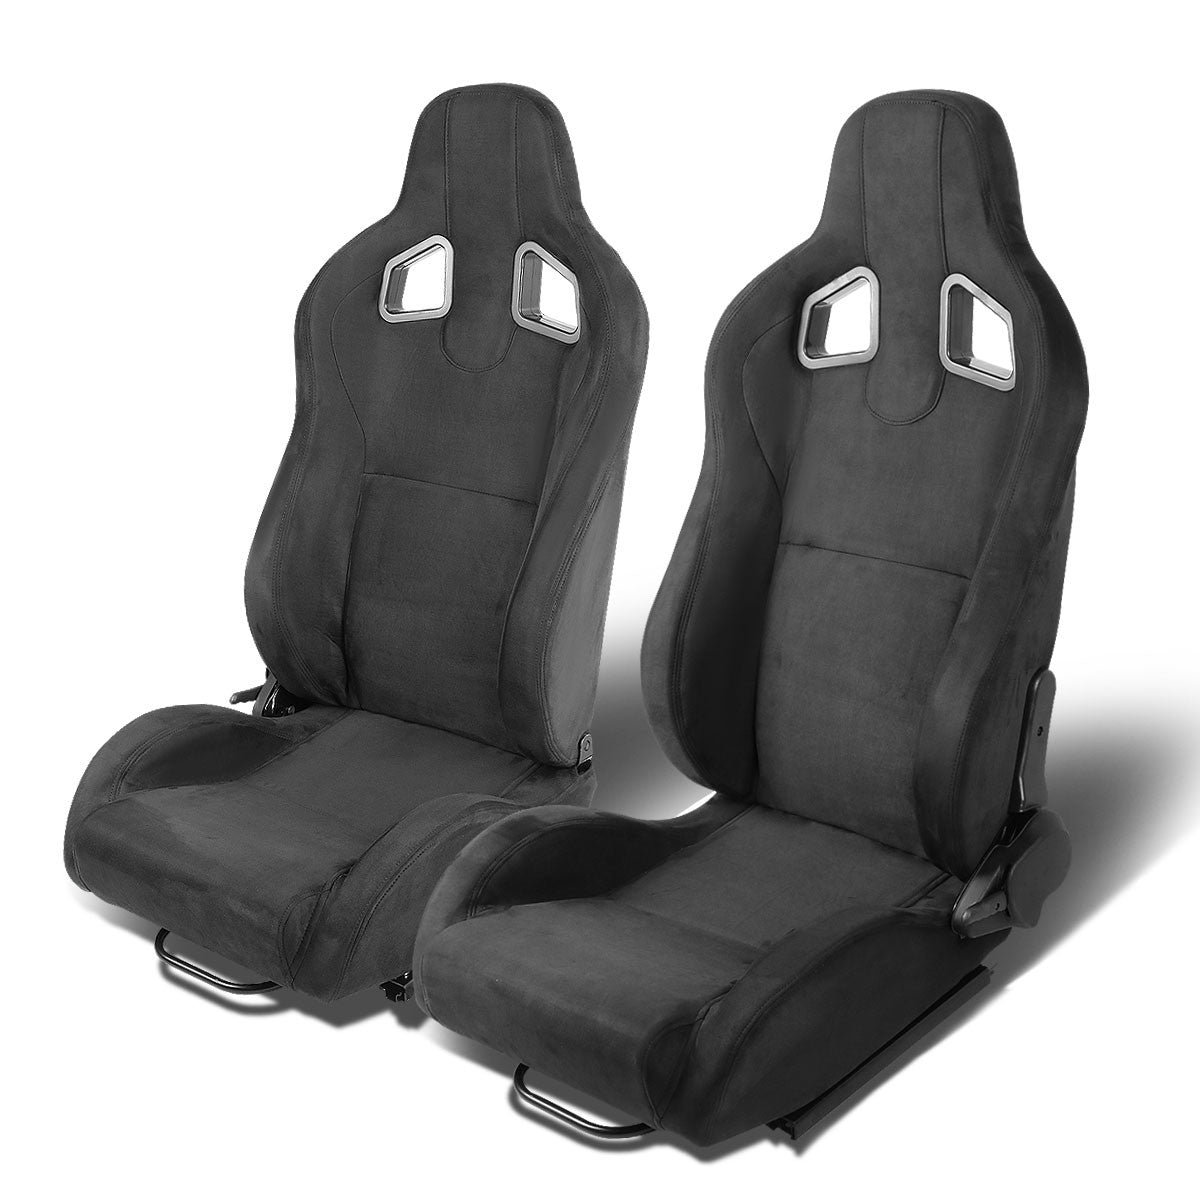 Racing Seats - Reclinable - Type-R Style - Faux Suede - Pair